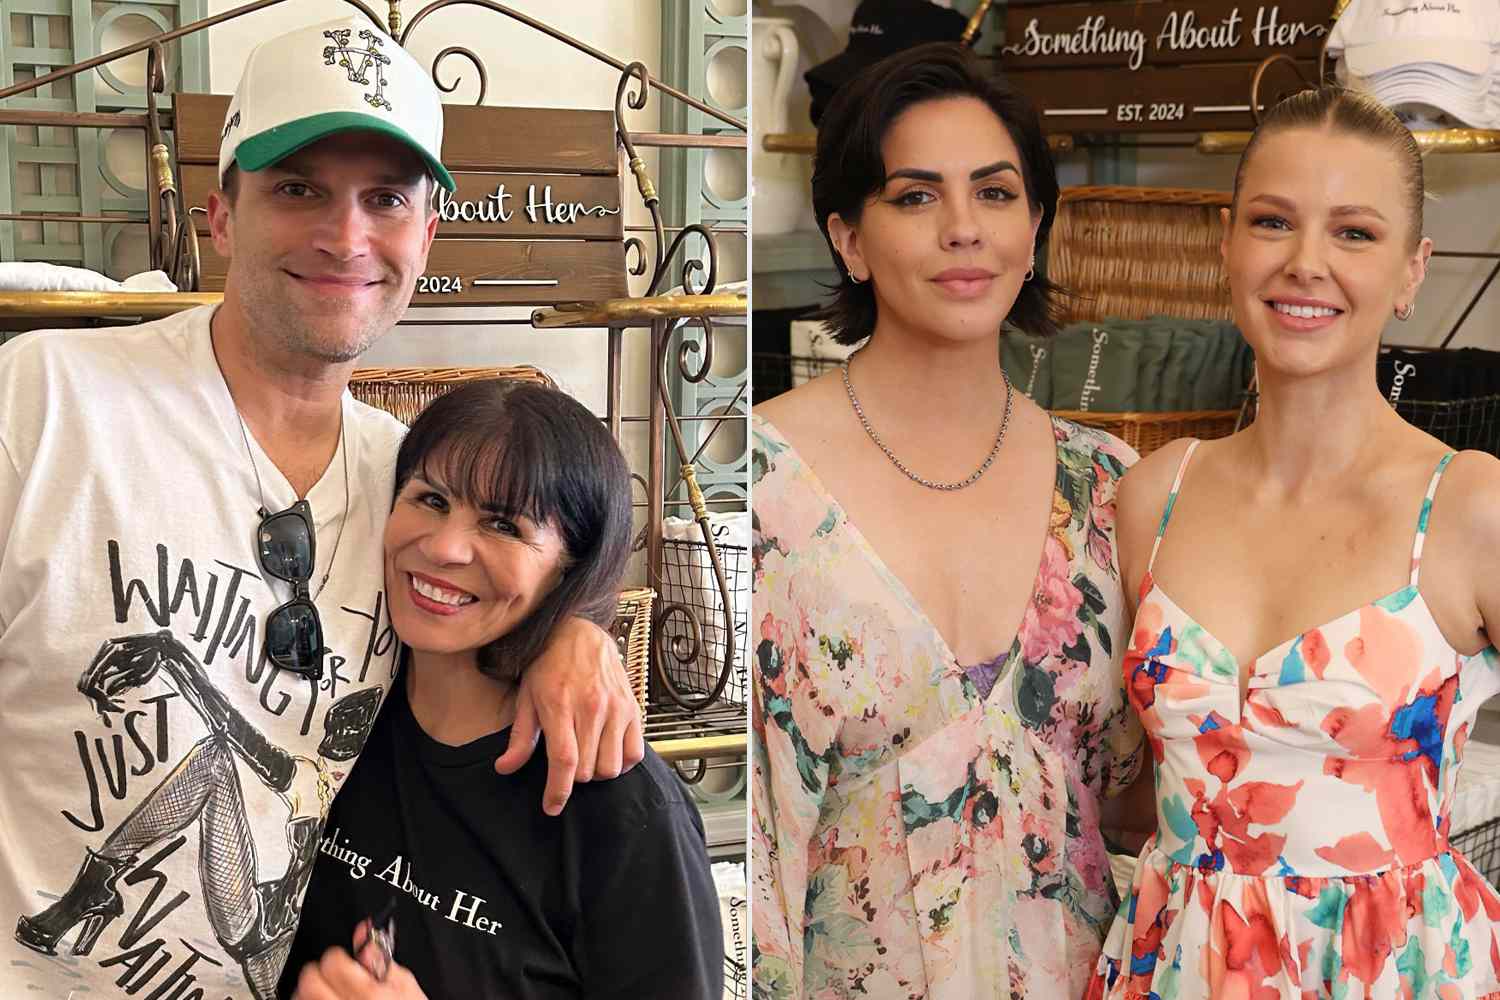 Tom Schwartz Supports Ex Katie Maloney’s New Sandwich Shop and Poses with Her Mom Teri